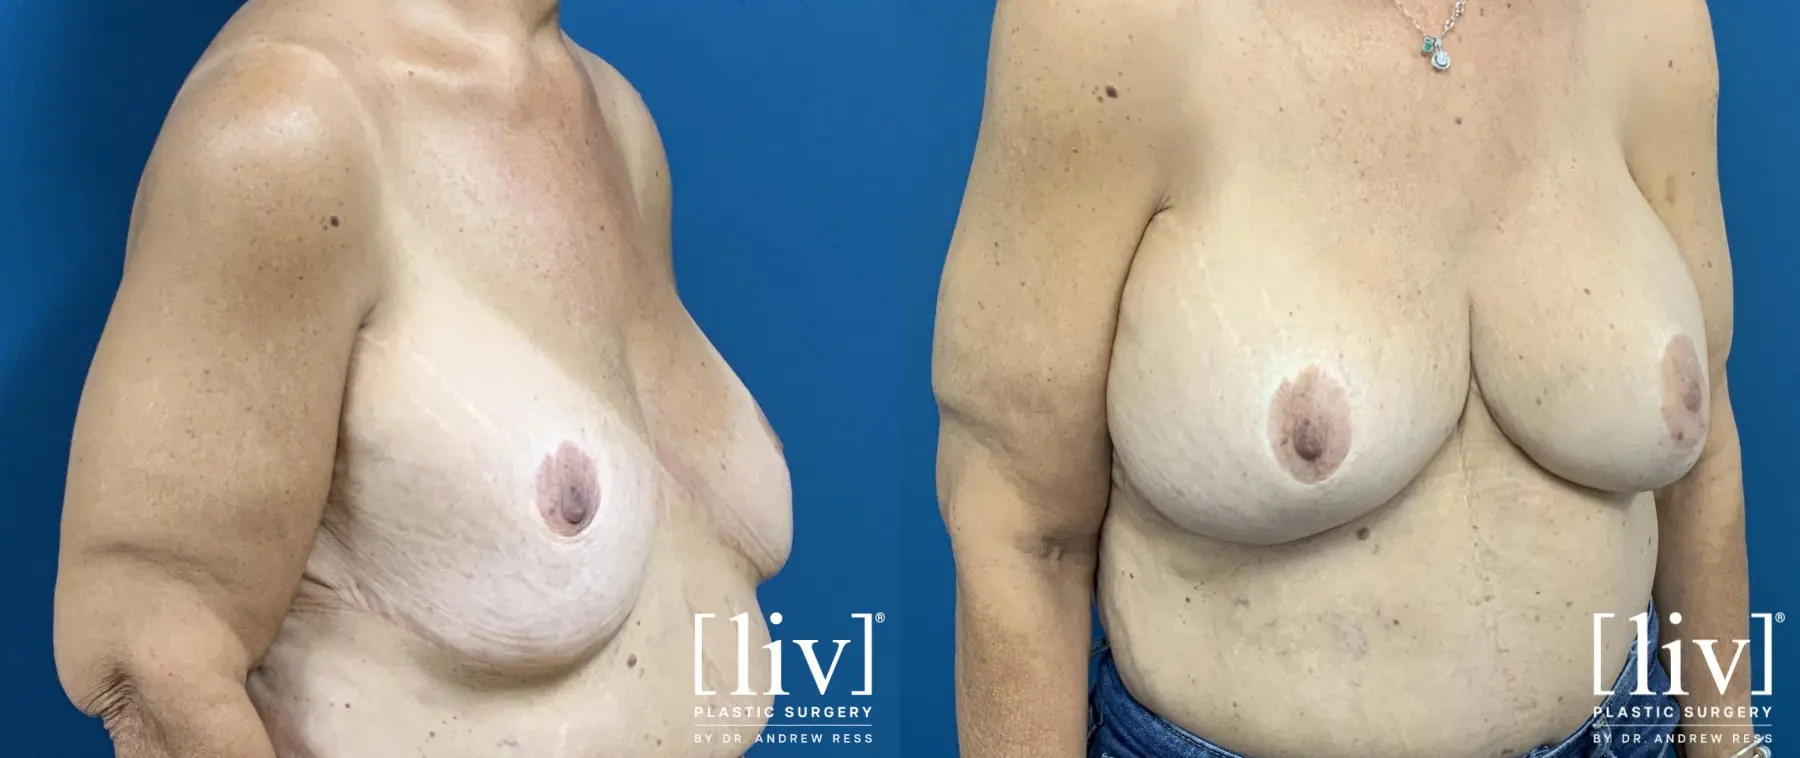 Breast Implant Exchange and Repositioning - Before and After 4